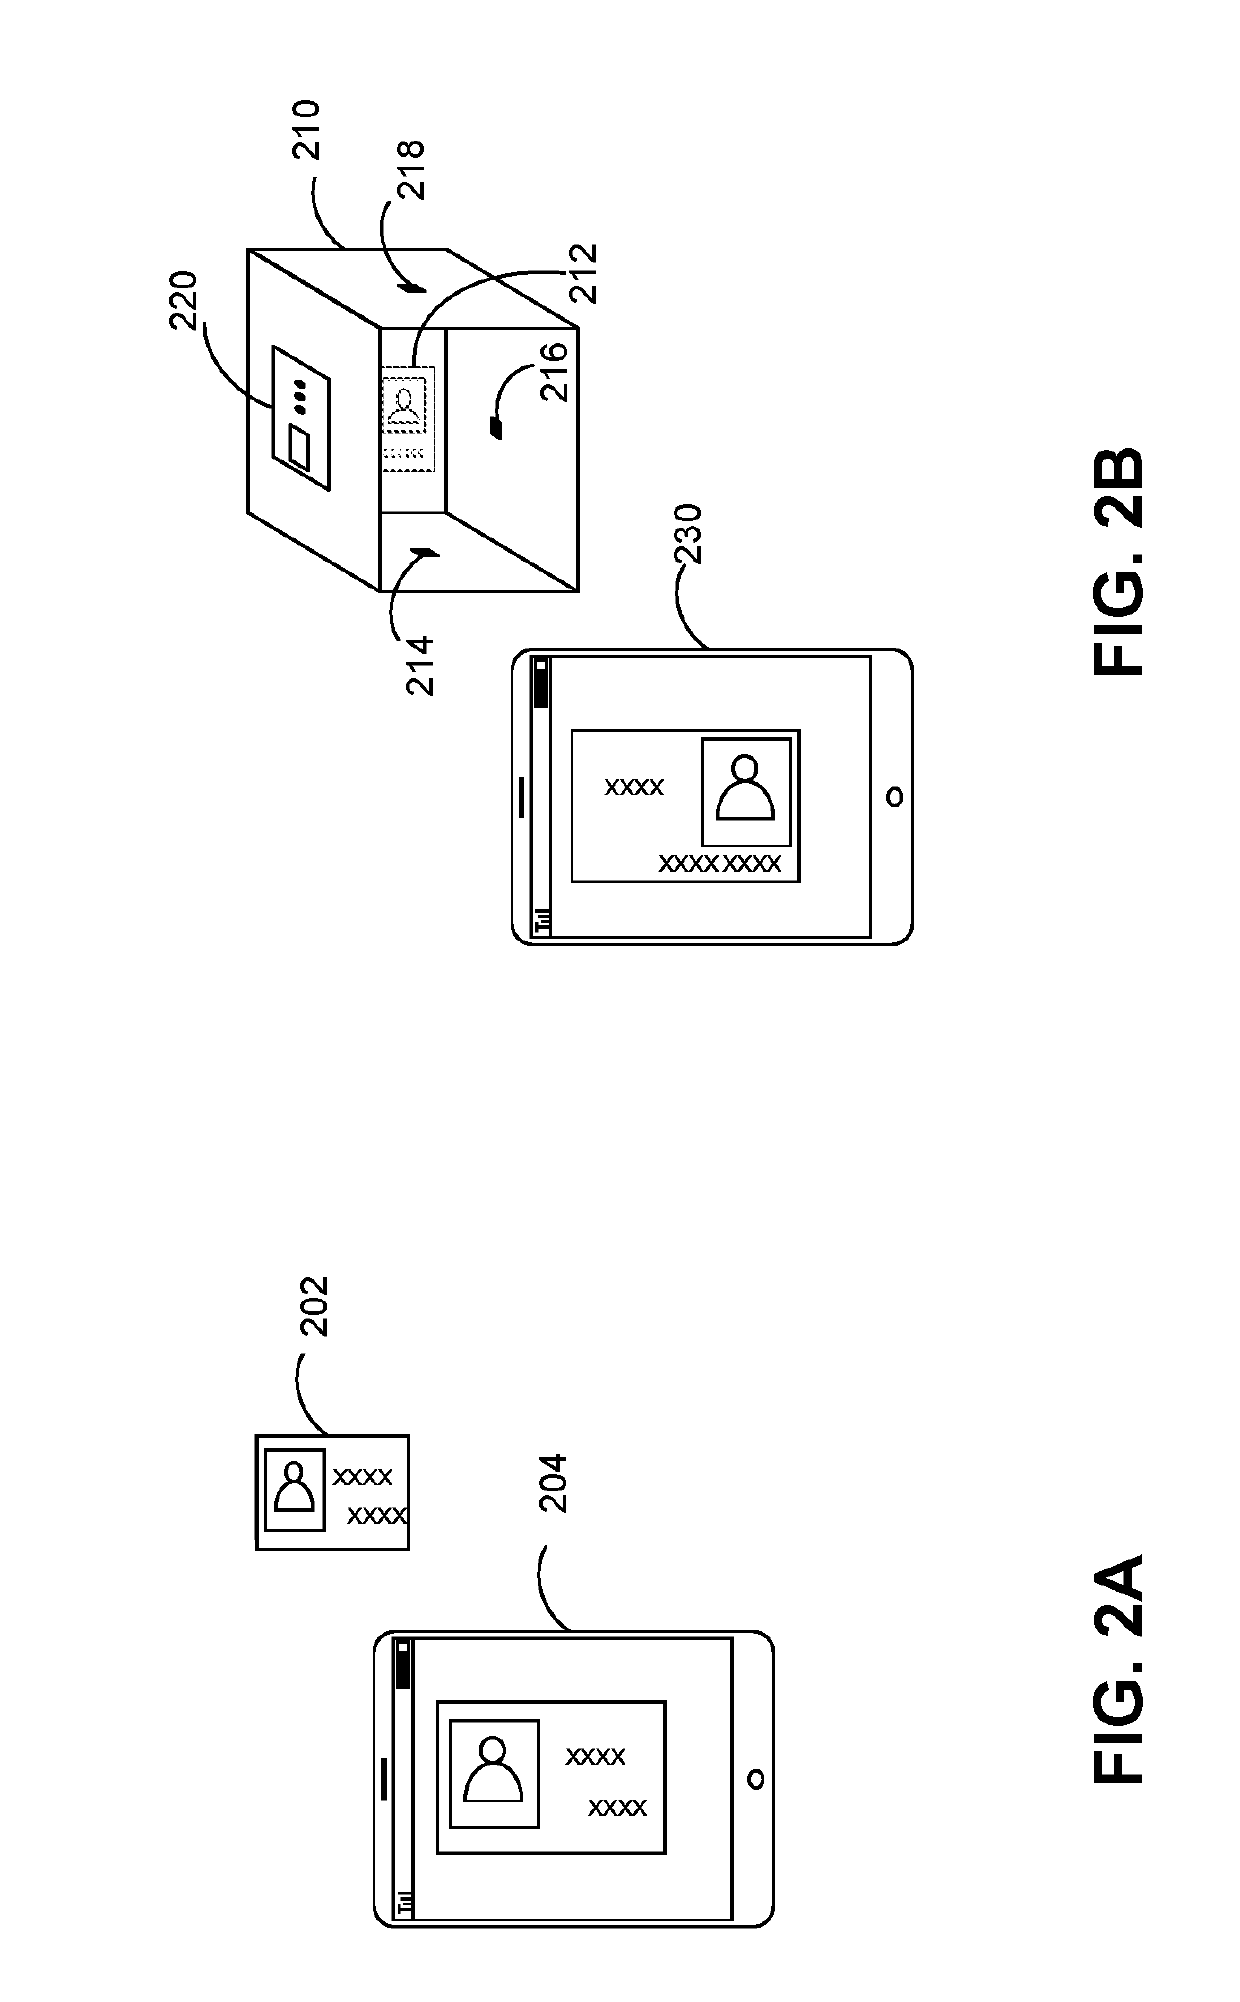 System and method for identifying physical objects